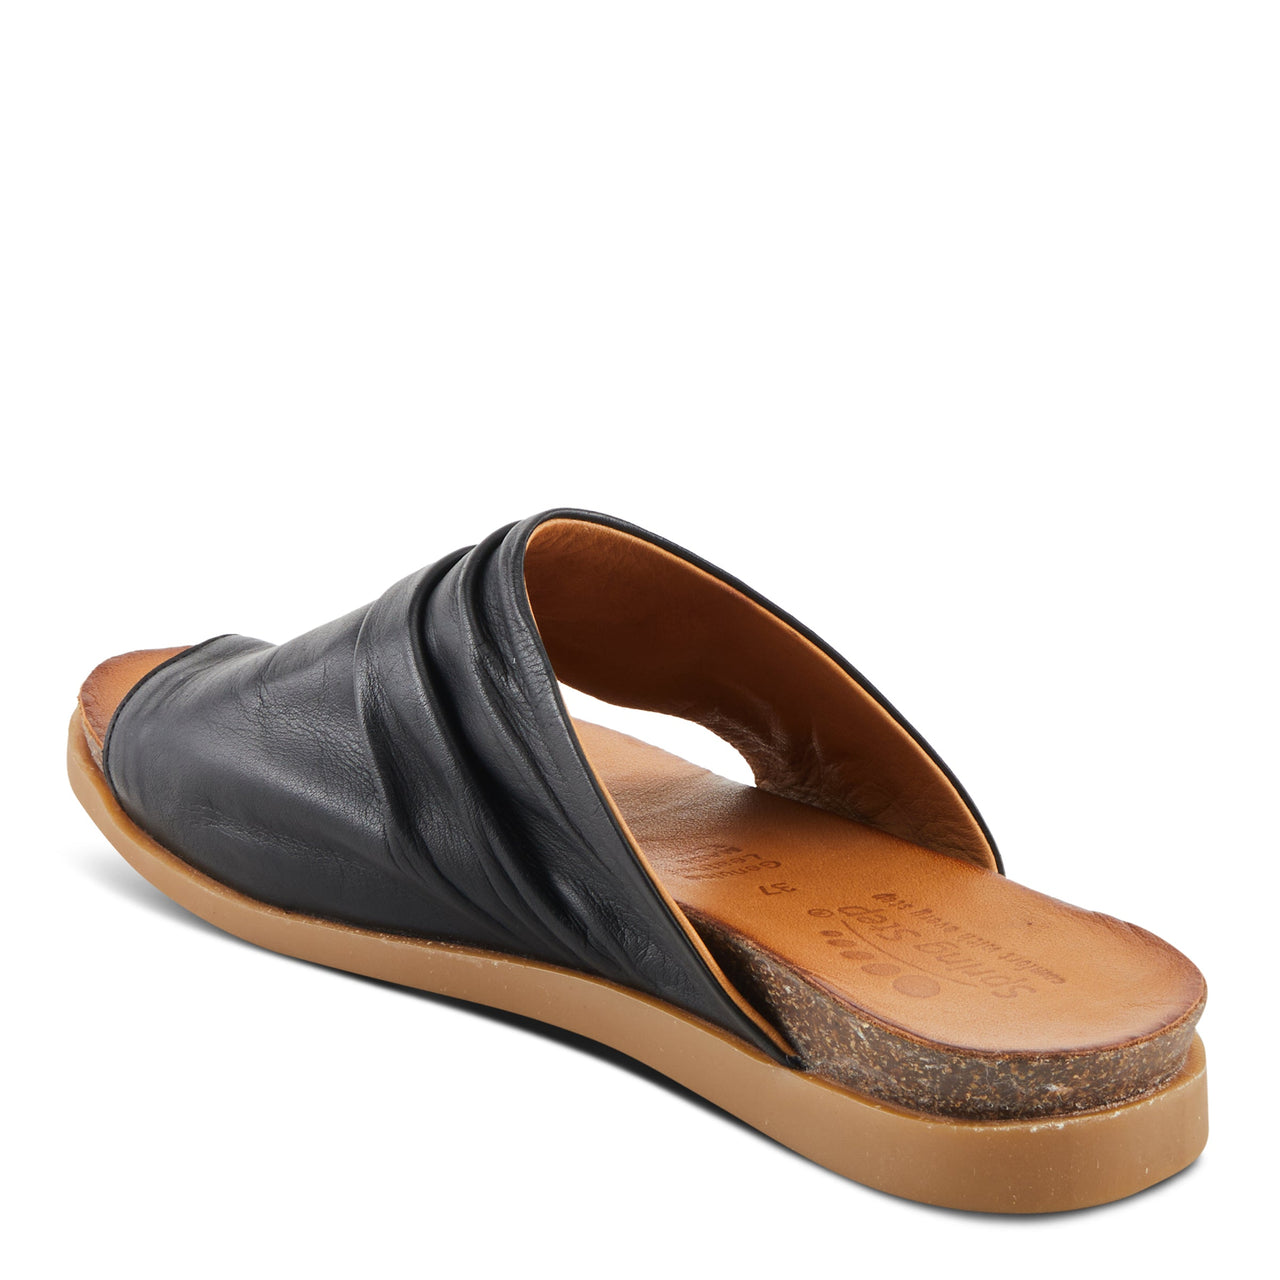 Stylish and comfortable Spring Step Bates sandals with a cushioned insole and adjustable straps